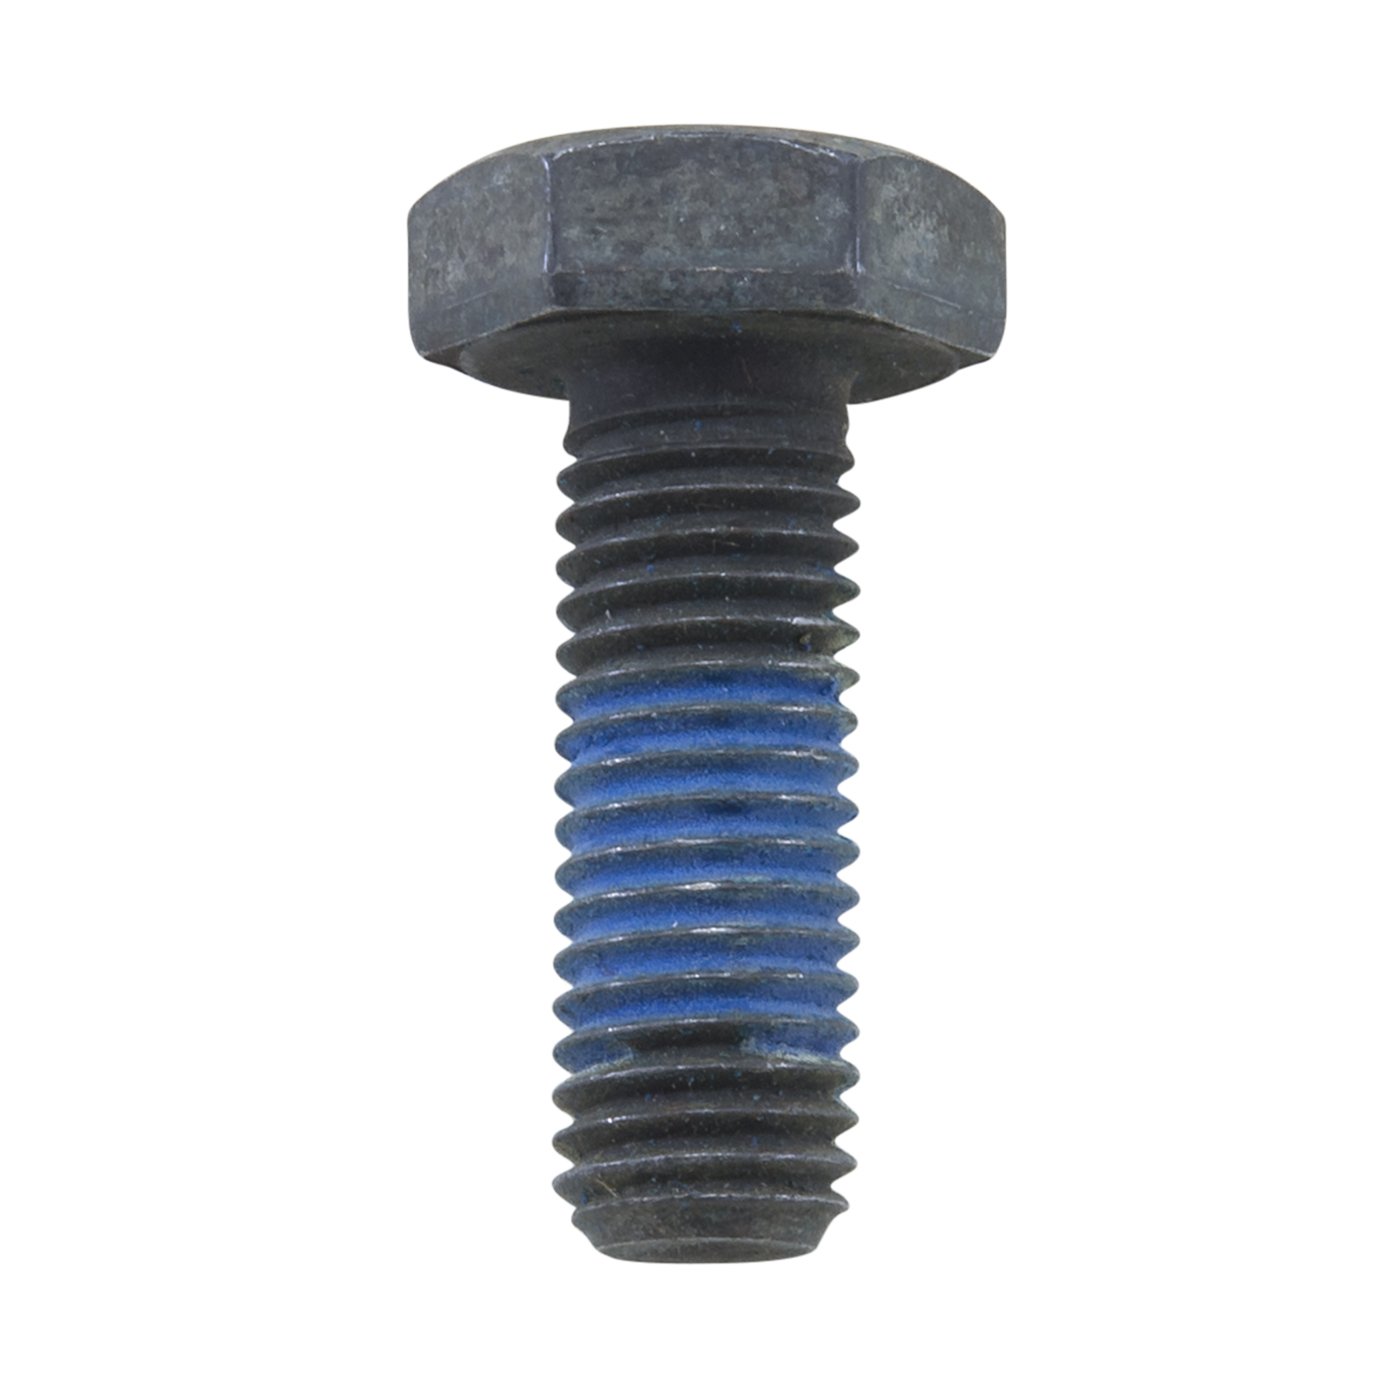 Replacement ring gear bolt for Dana S110. 15/16" head. 